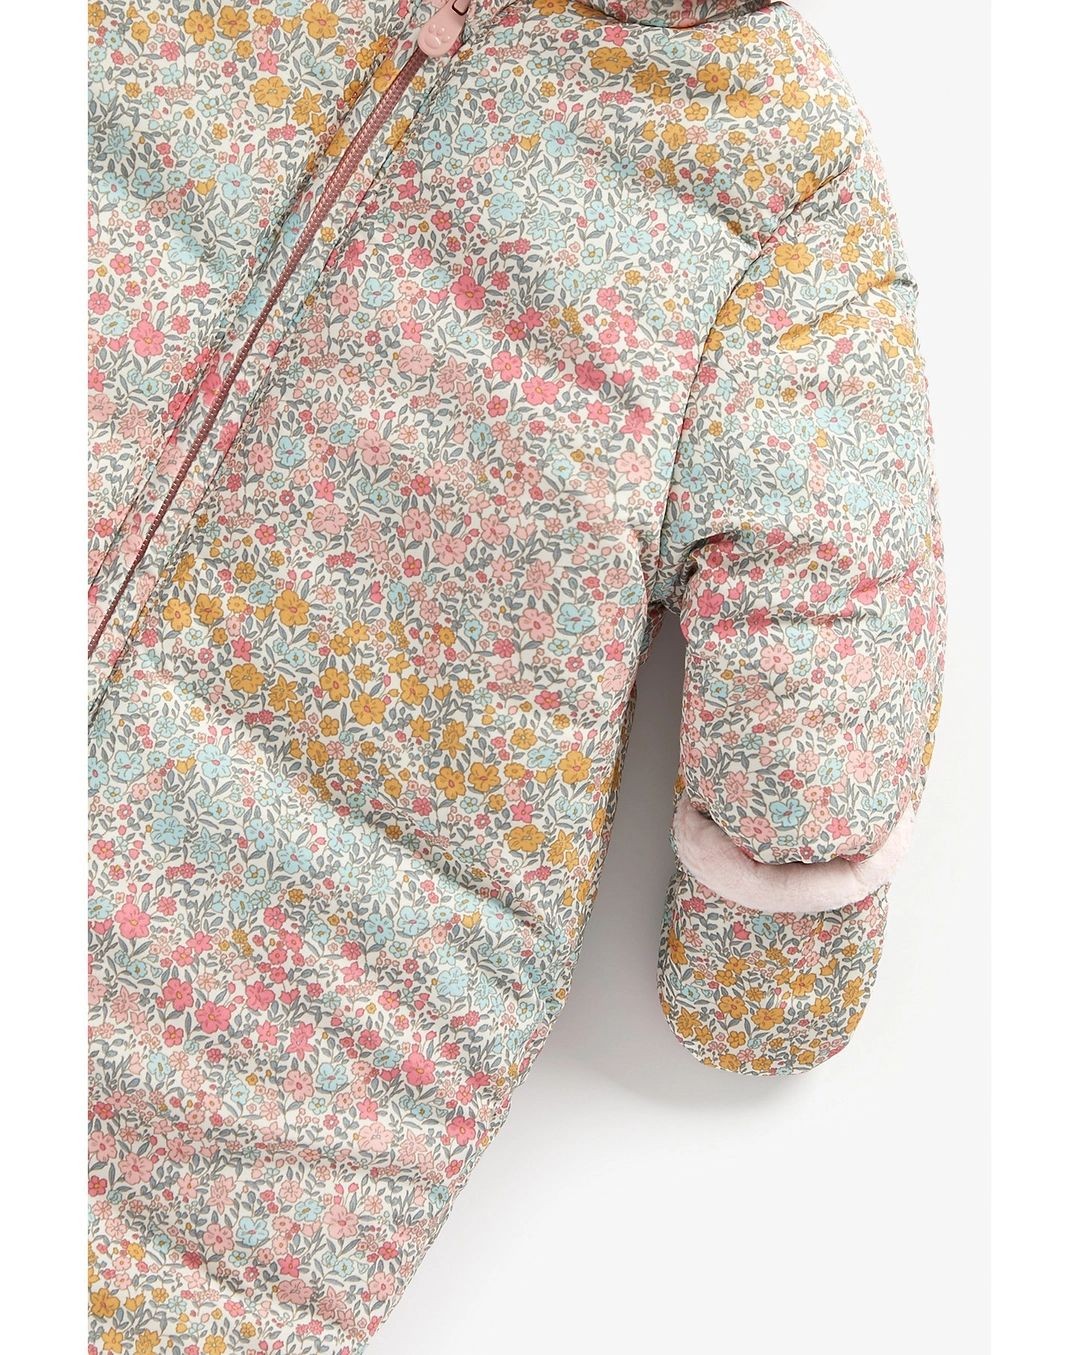 Mothercare Snowsuit Floral Print (9-12M) Girl Coverall